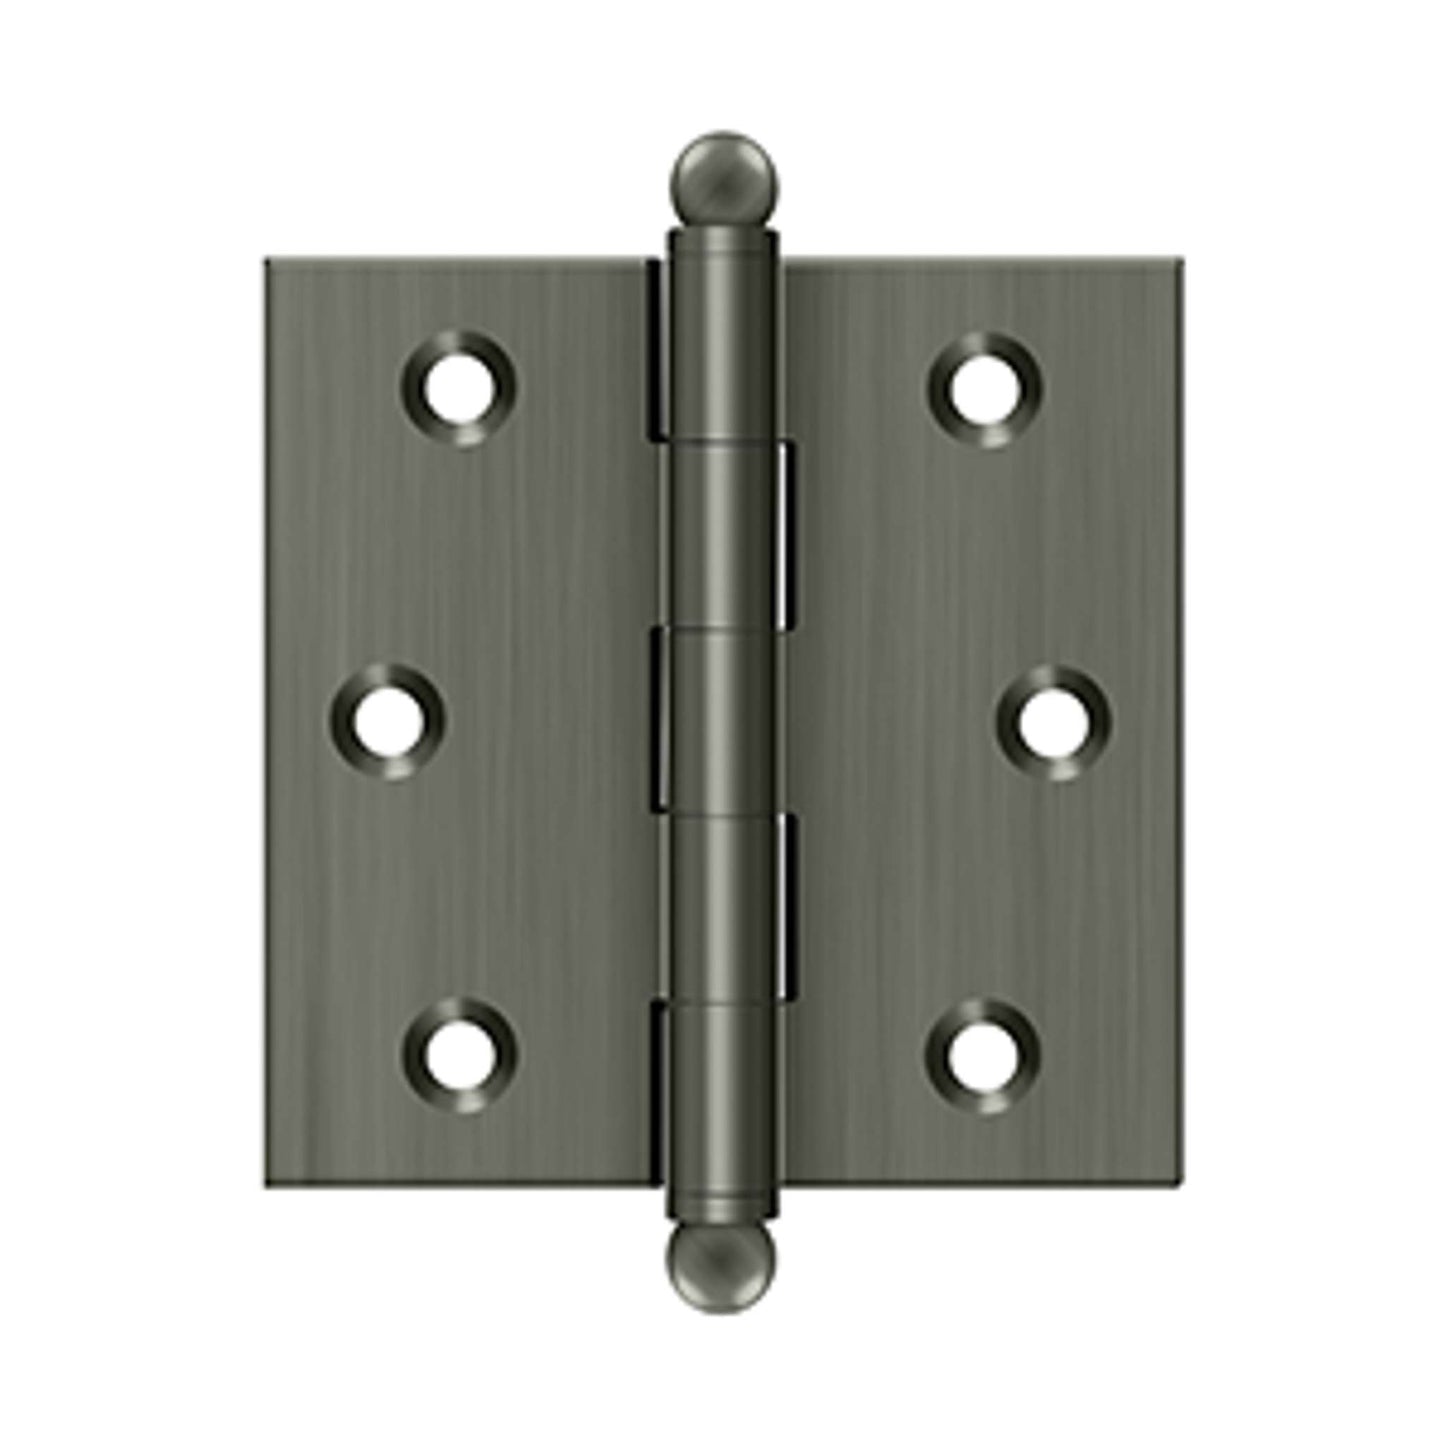 Deltana - 2-1/2" x 2-1/2" Hinge, w/ Ball Tips, Specialty Solid Brass